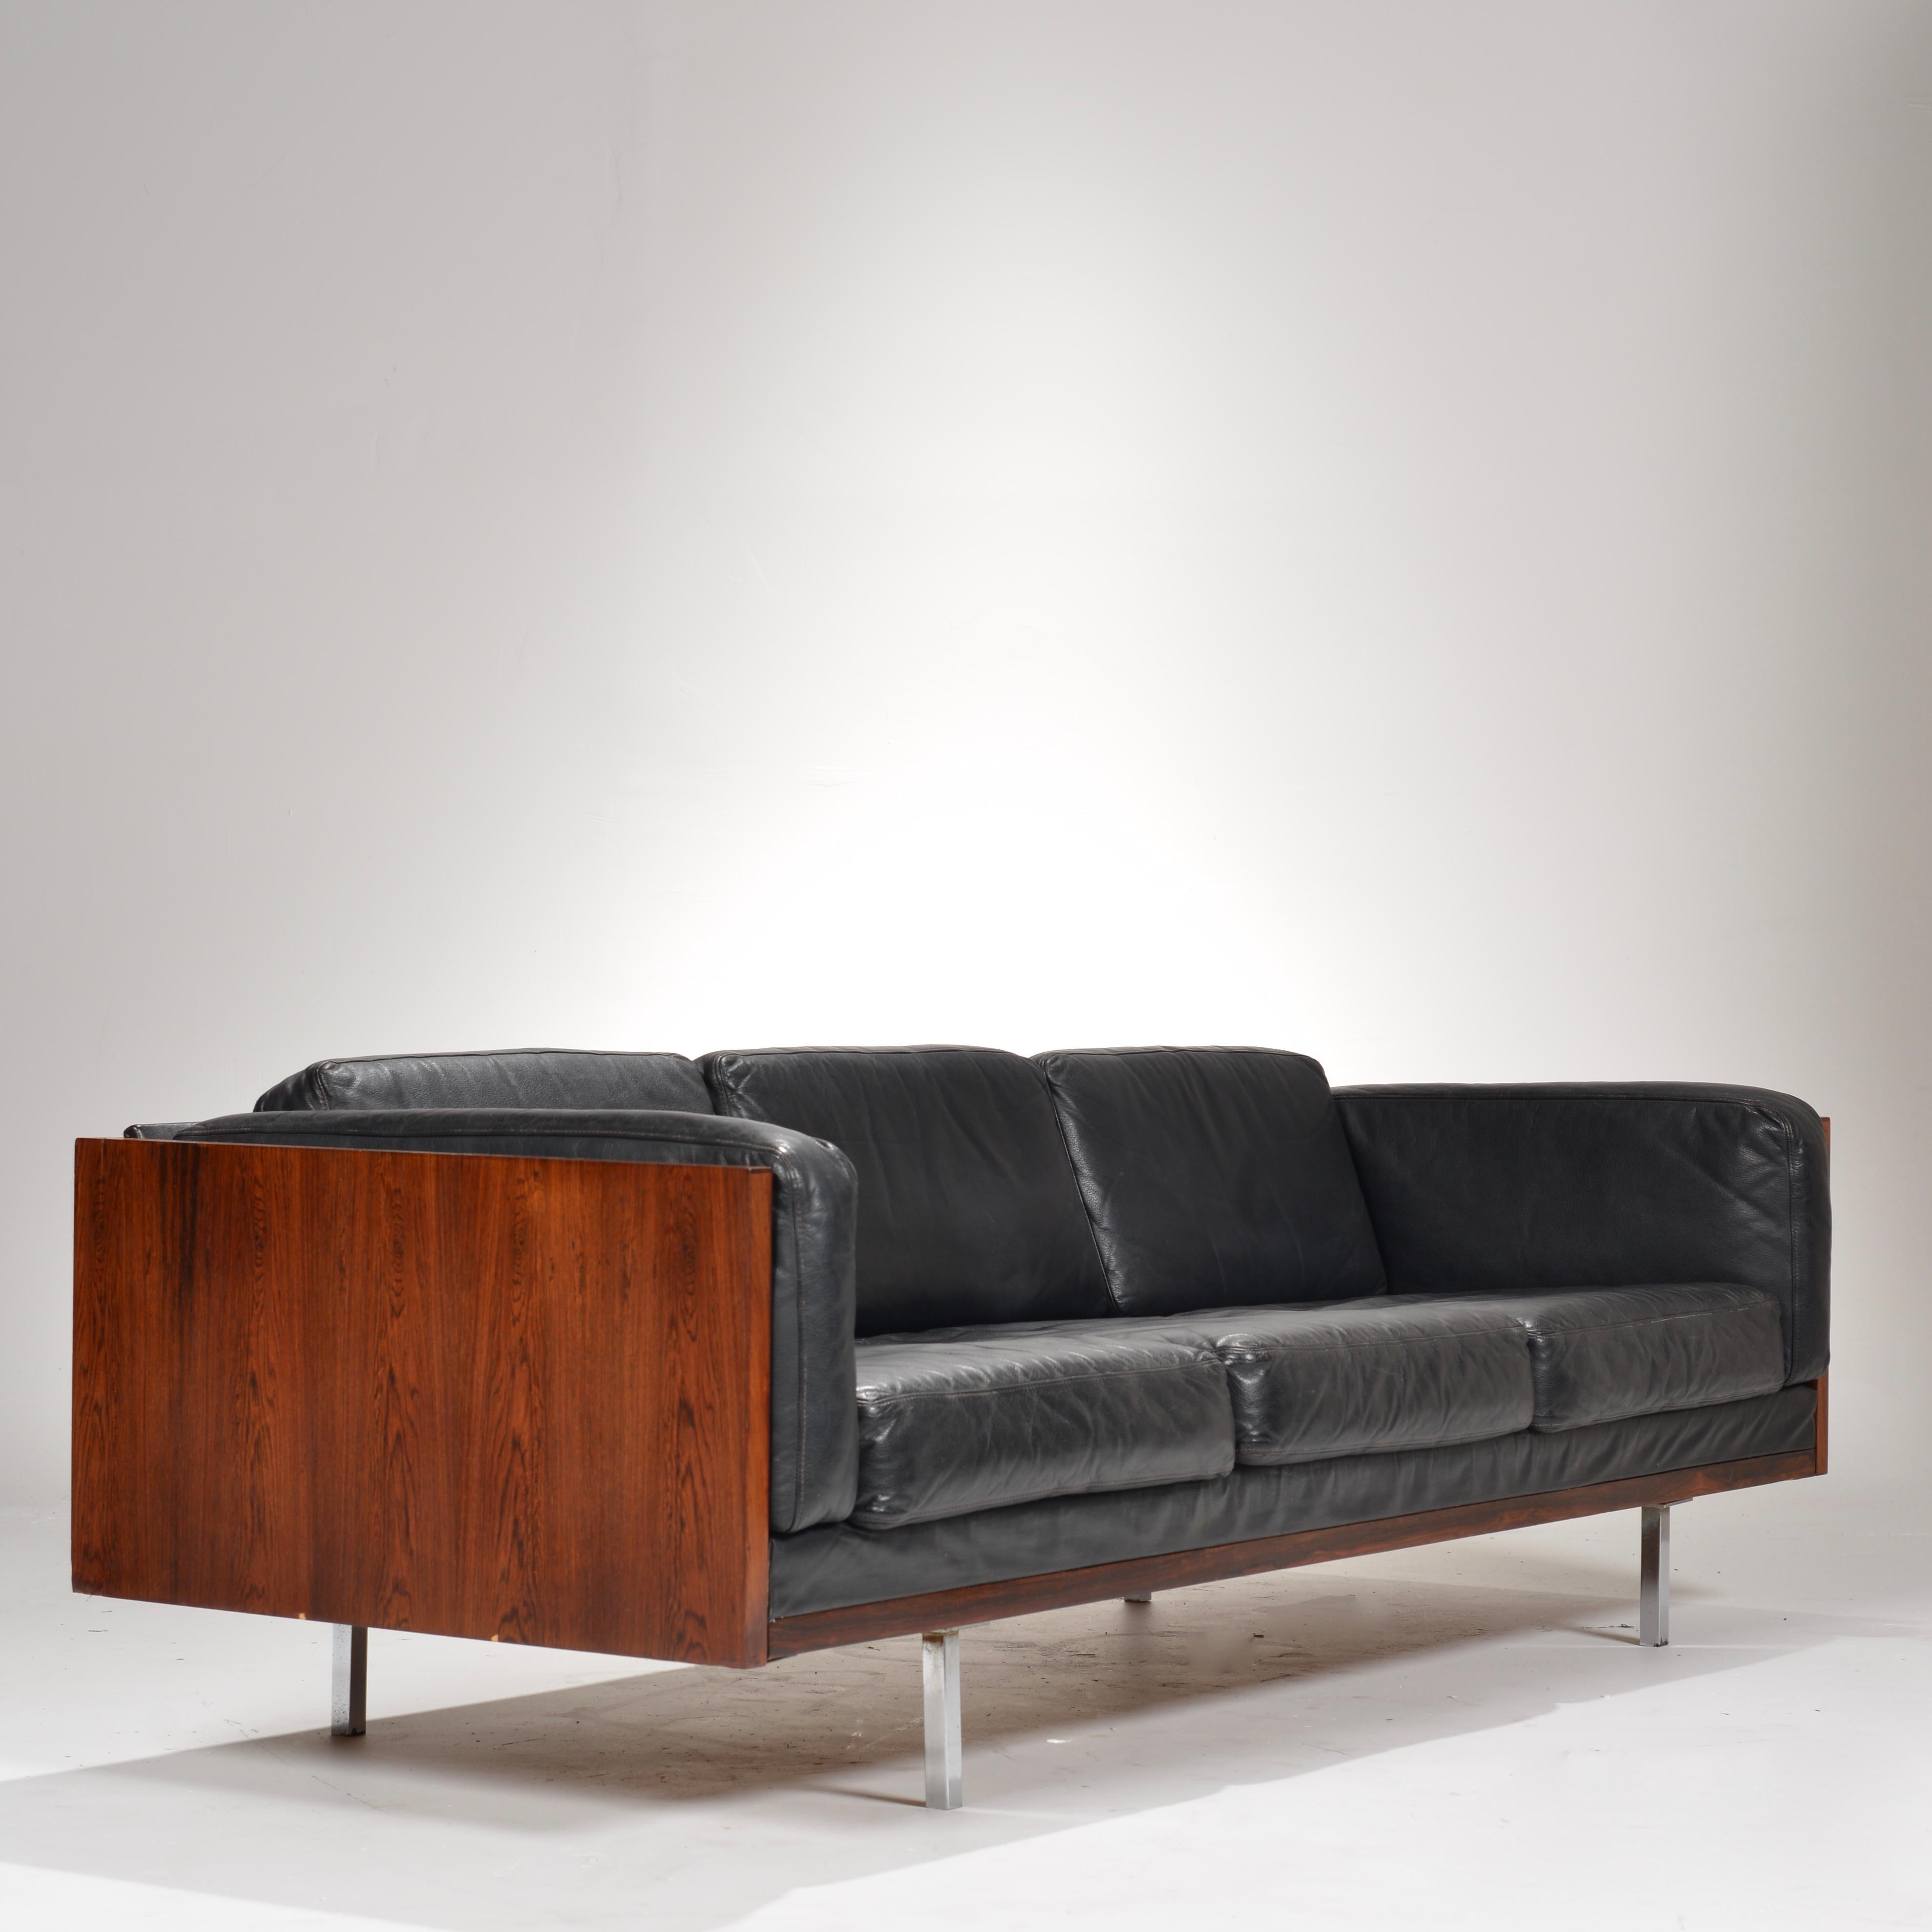 Amazing rosewood case sofa by Comfort of Denmark. The sofa has a three-sided case in boldly figured Brazilian rosewood, and the long, horizontal design appears to float above the ground on four chrome-plated square legs.